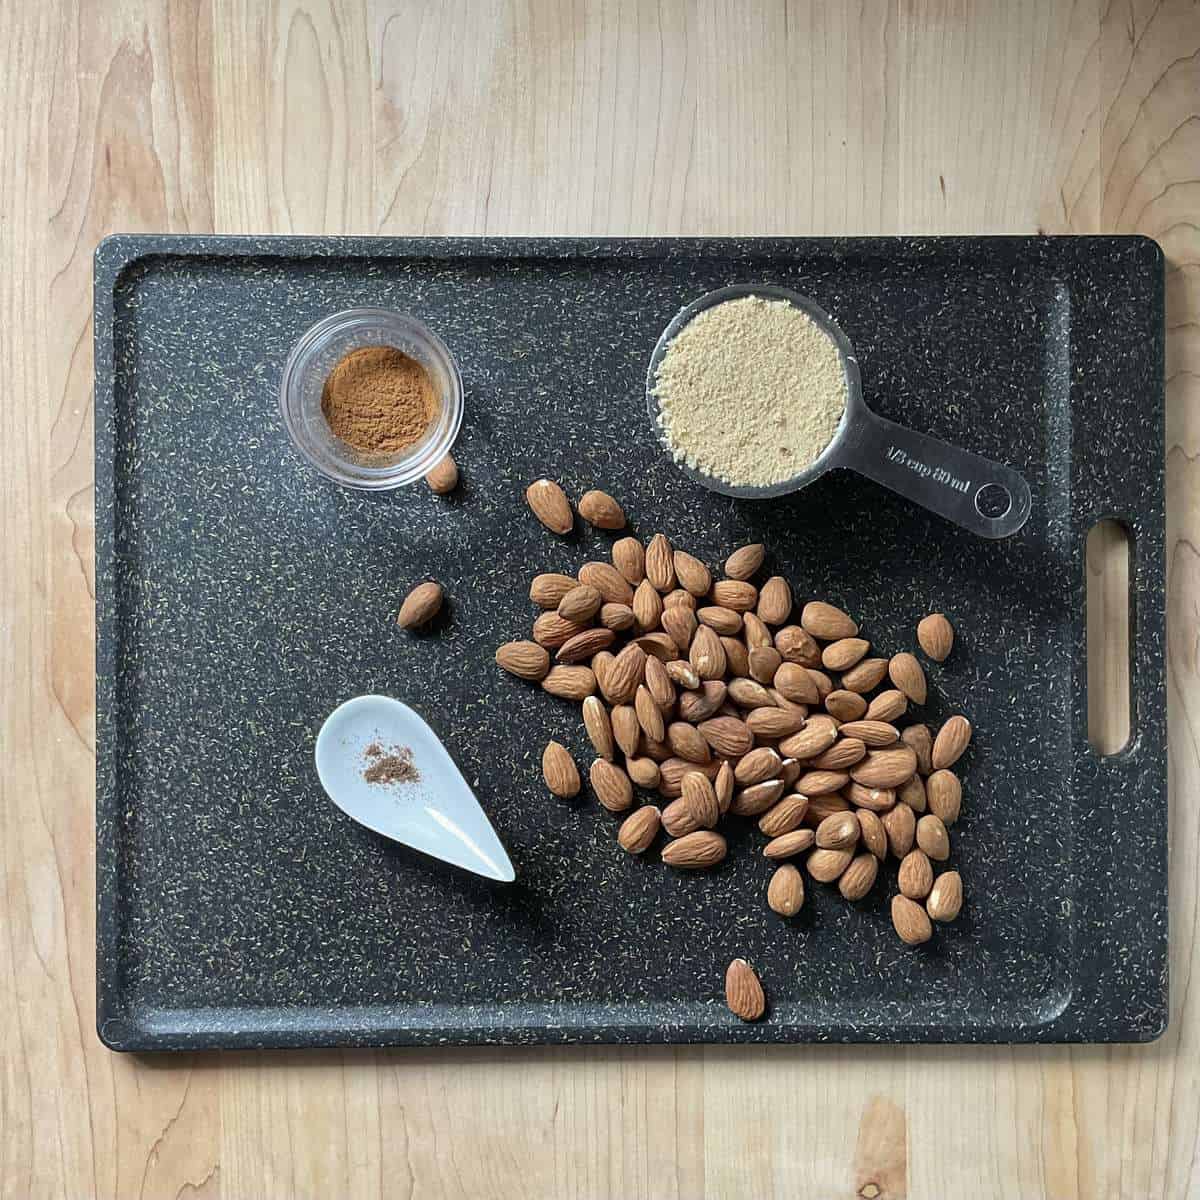 The ingredients to make the nut mixture on a cutting board.